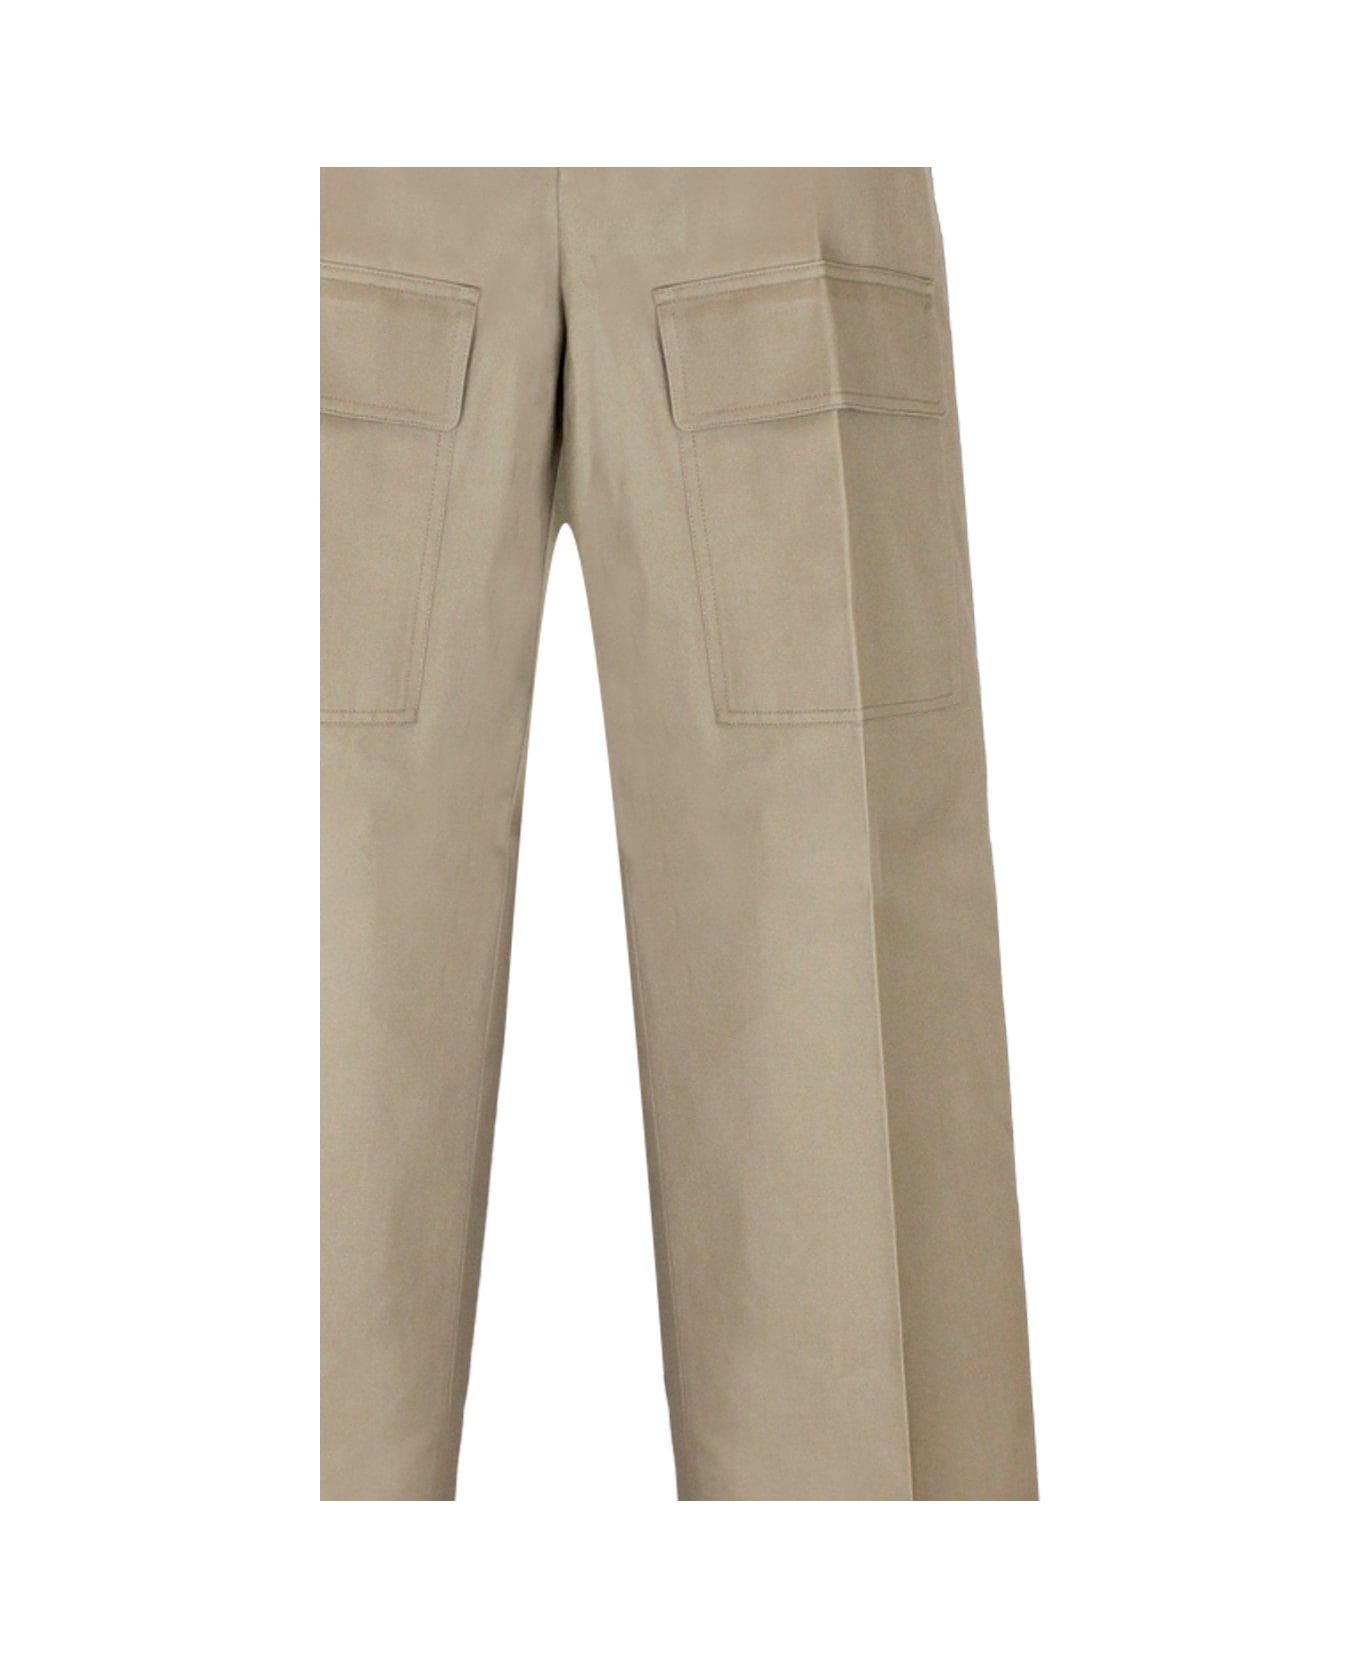 Gucci Wide-leg Cargo Trousers - Cereal ボトムス